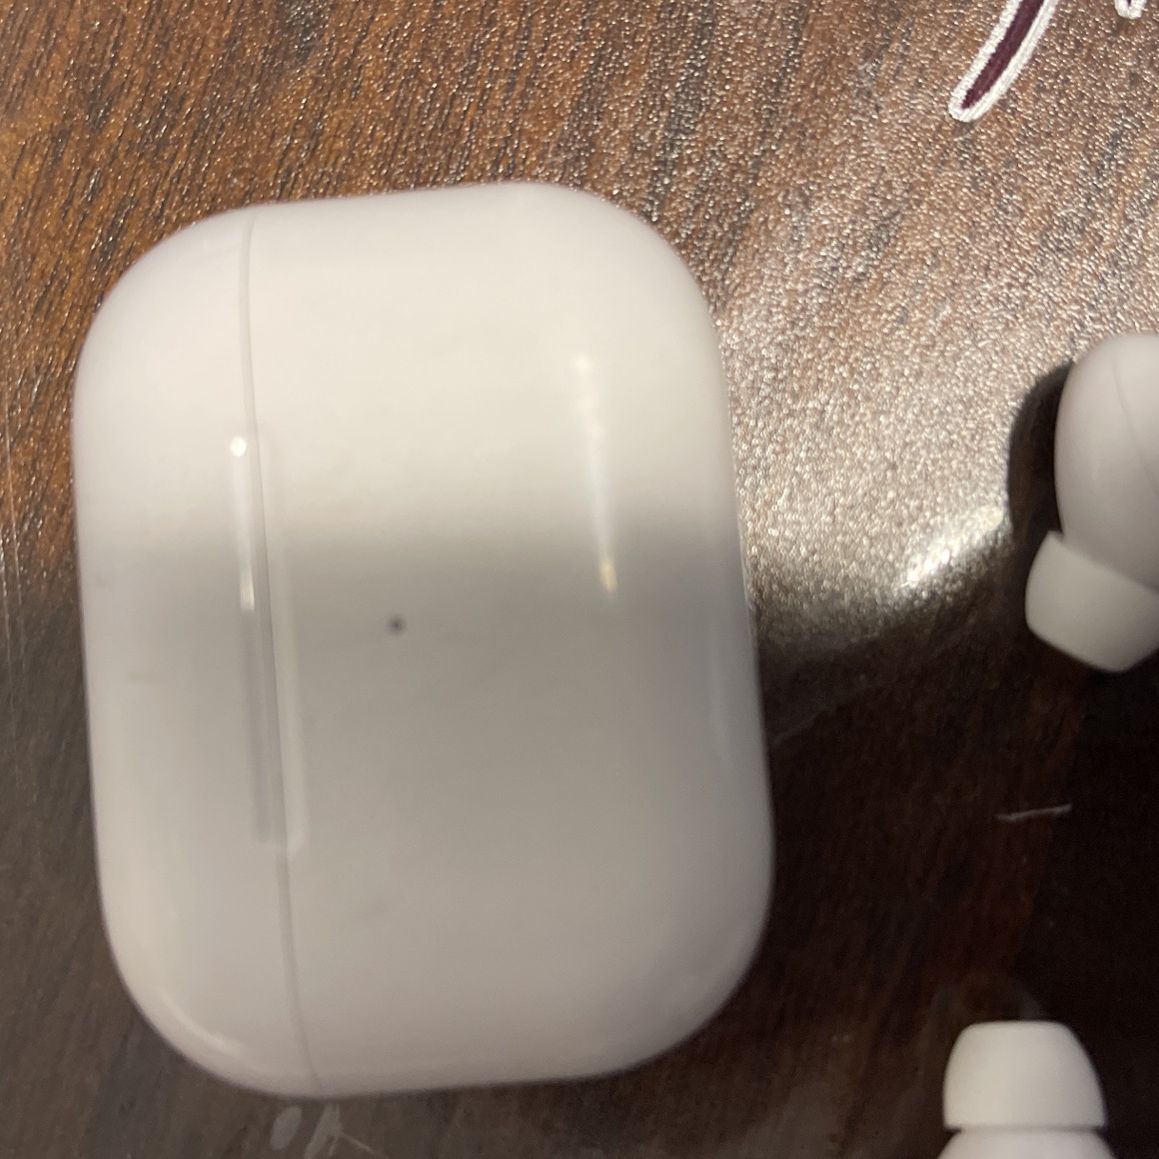 Airpods pros